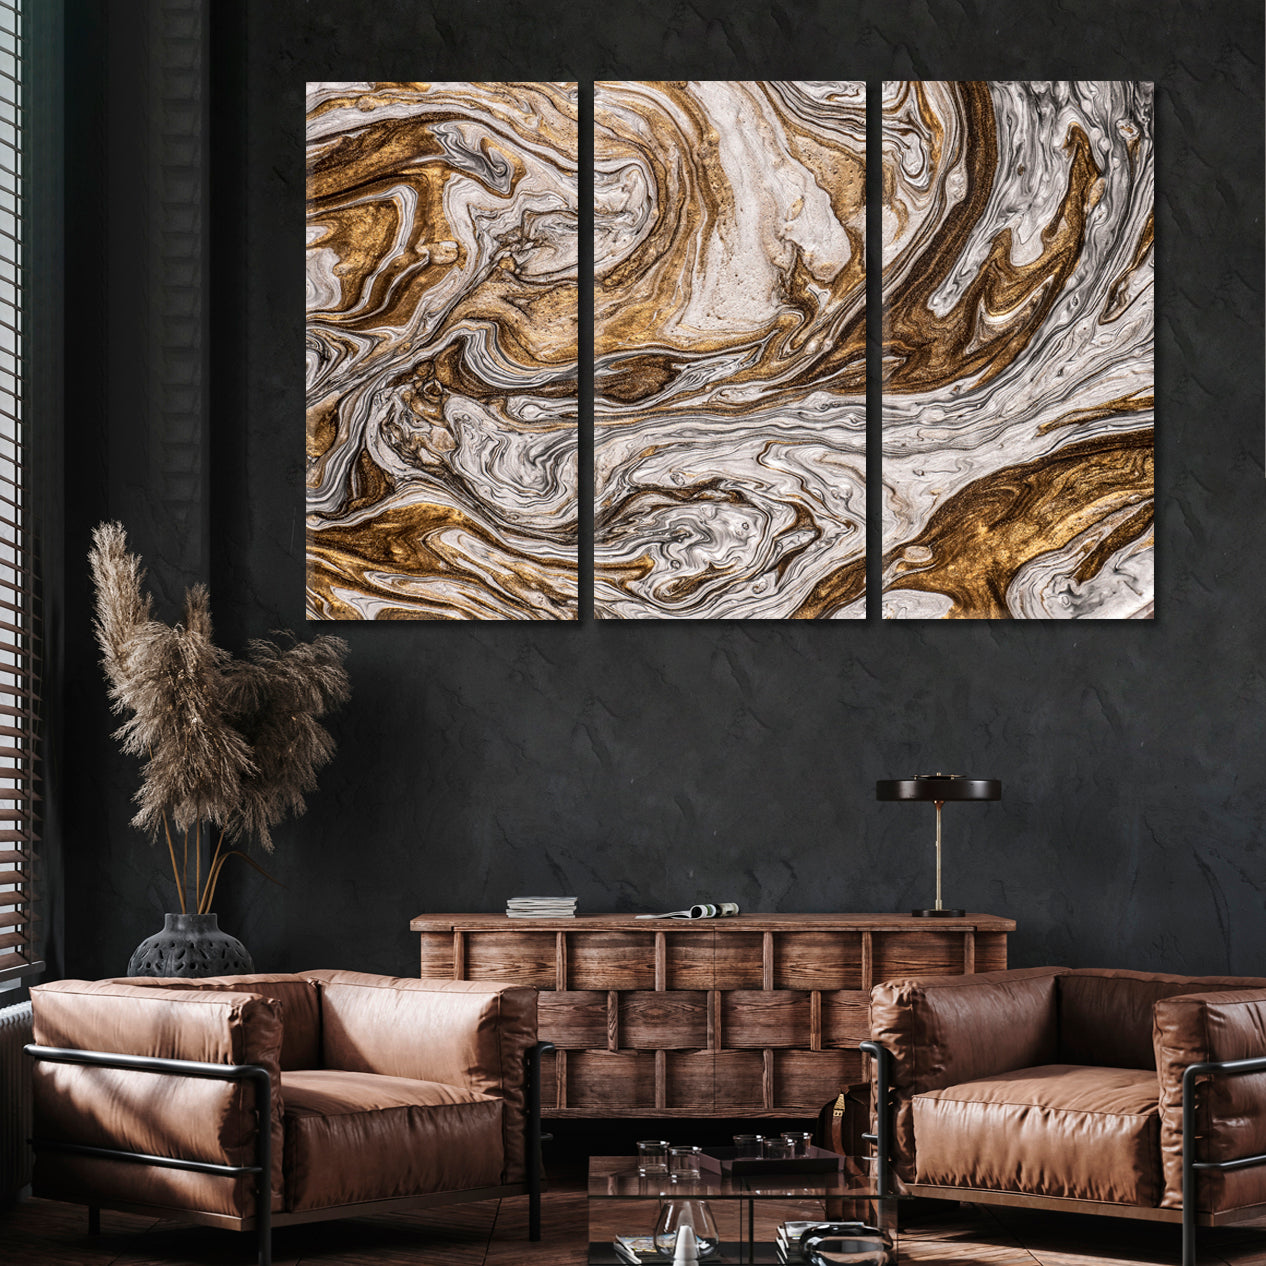 BROWN GREY Effect of Gold and Silver Powder Abstract Marble Oriental Fluid Art Canvas Print Fluid Art, Oriental Marbling Canvas Print Artesty 3 panels 36" x 24" 